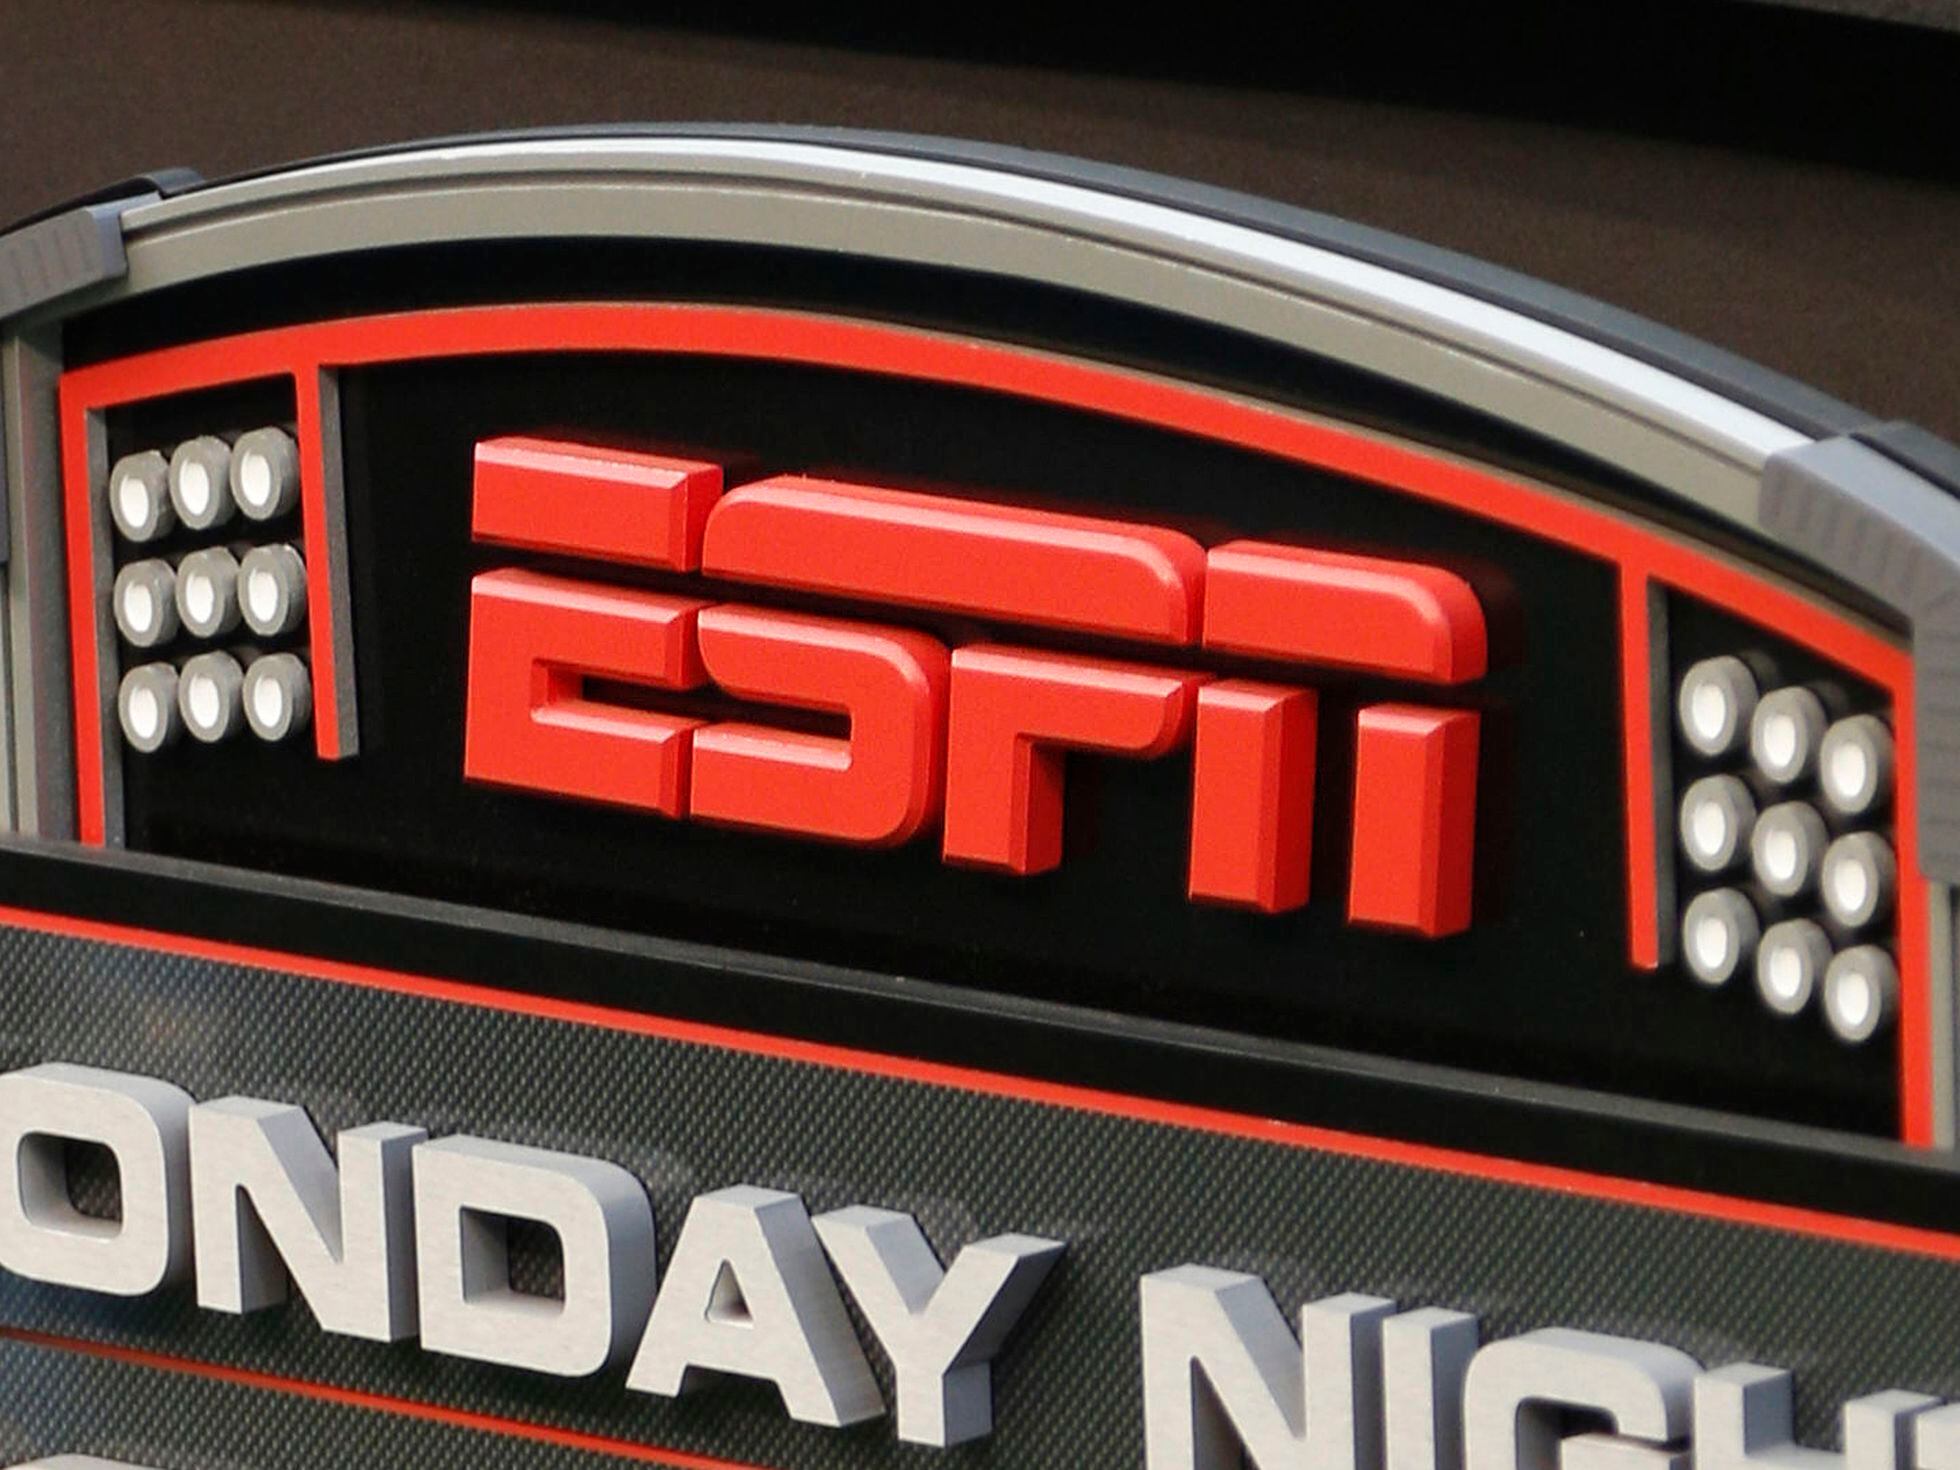 Where Charter Spectrum customers can watch ESPN, Disney Channel